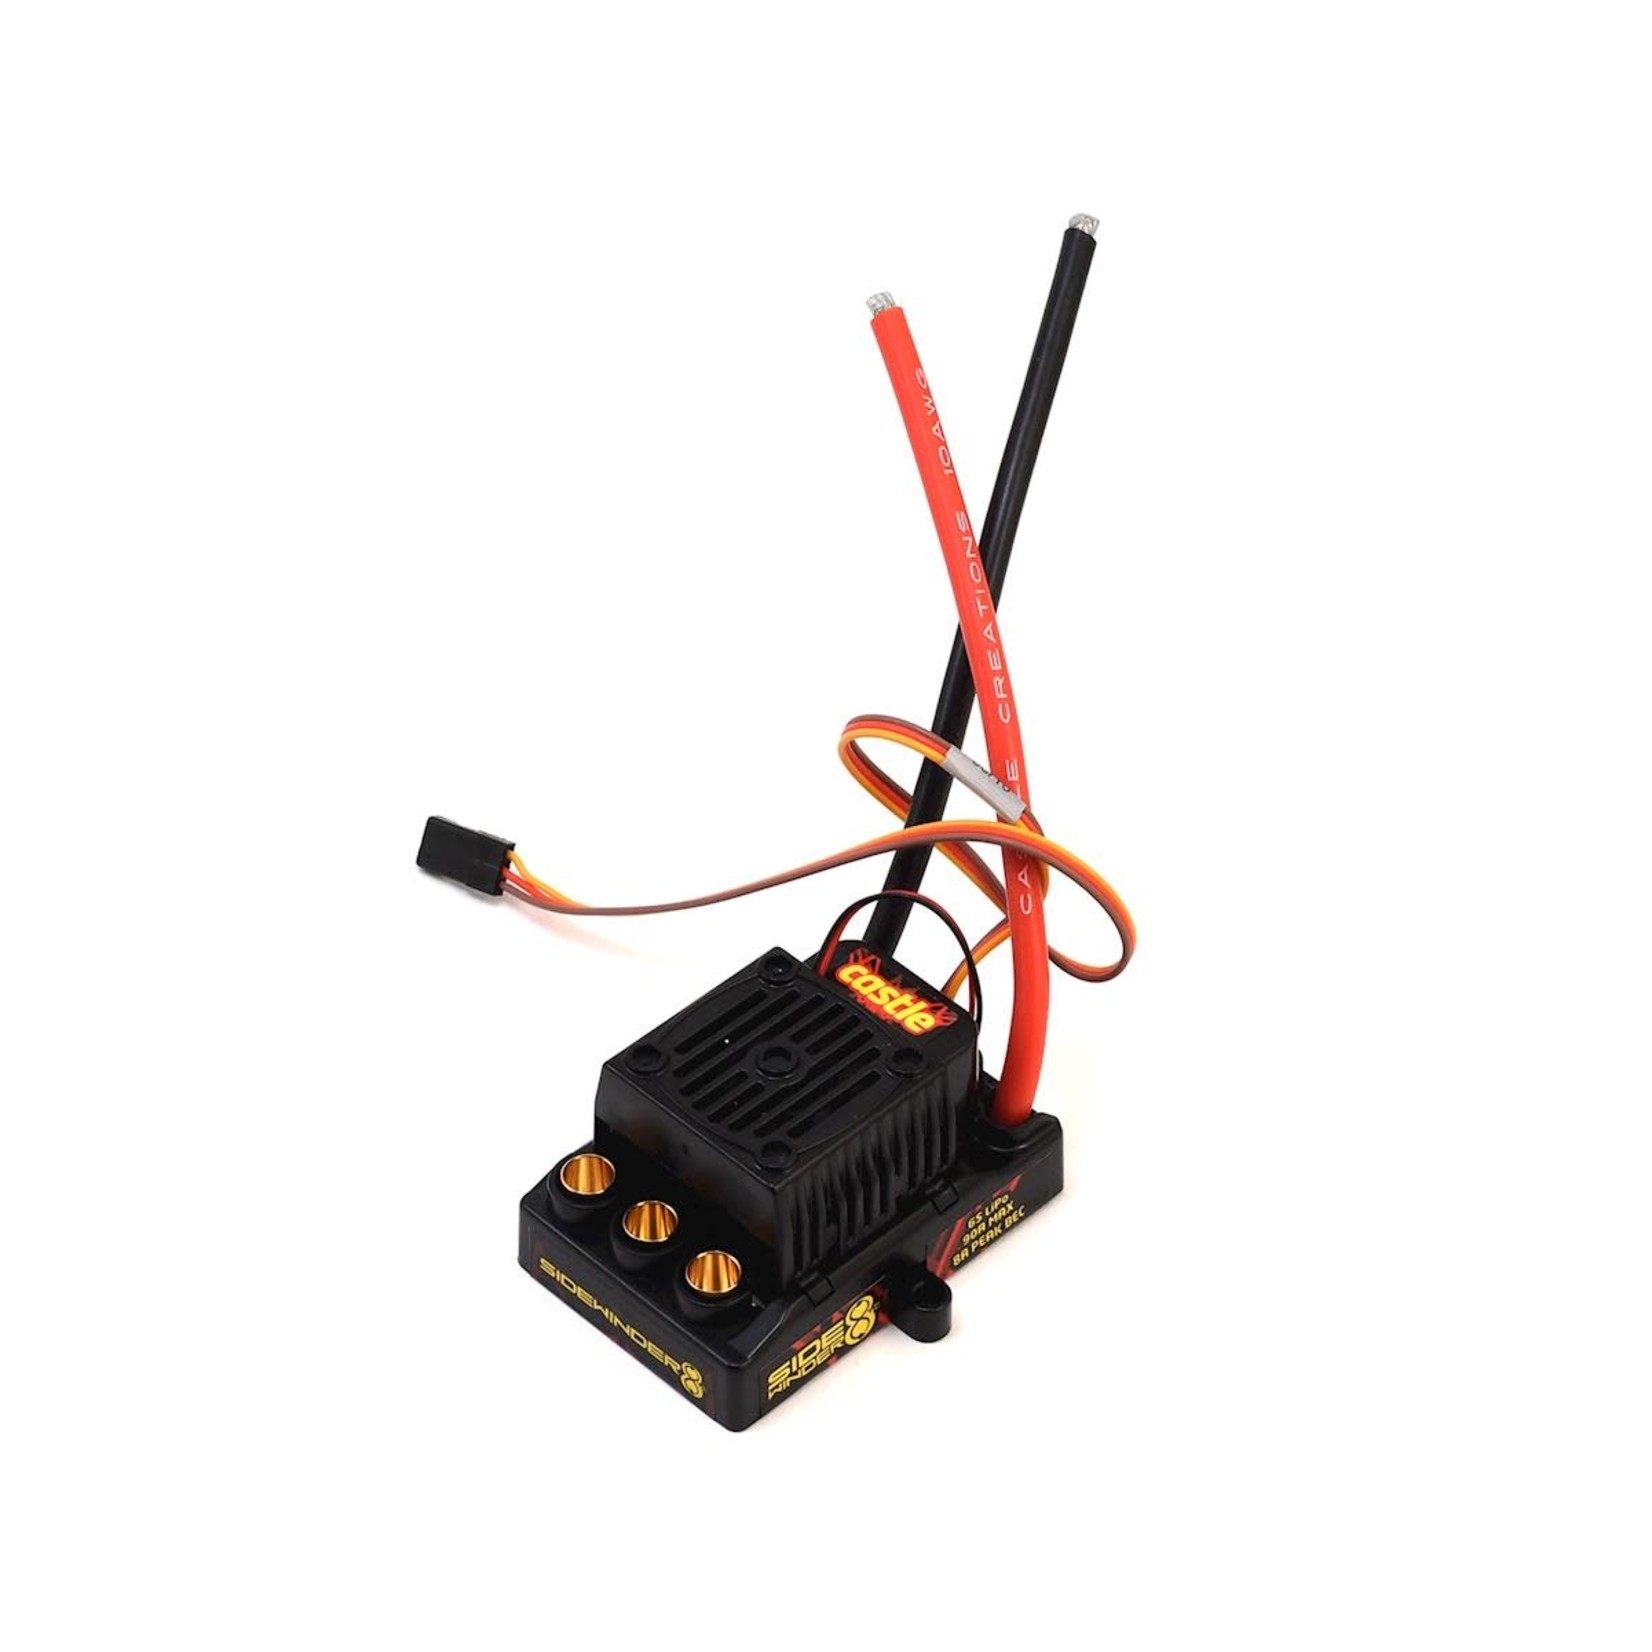 Castle Creations Castle Creations Sidewinder 8th 1/8 Scale Sensorless Brushless ESC #010-0139-10